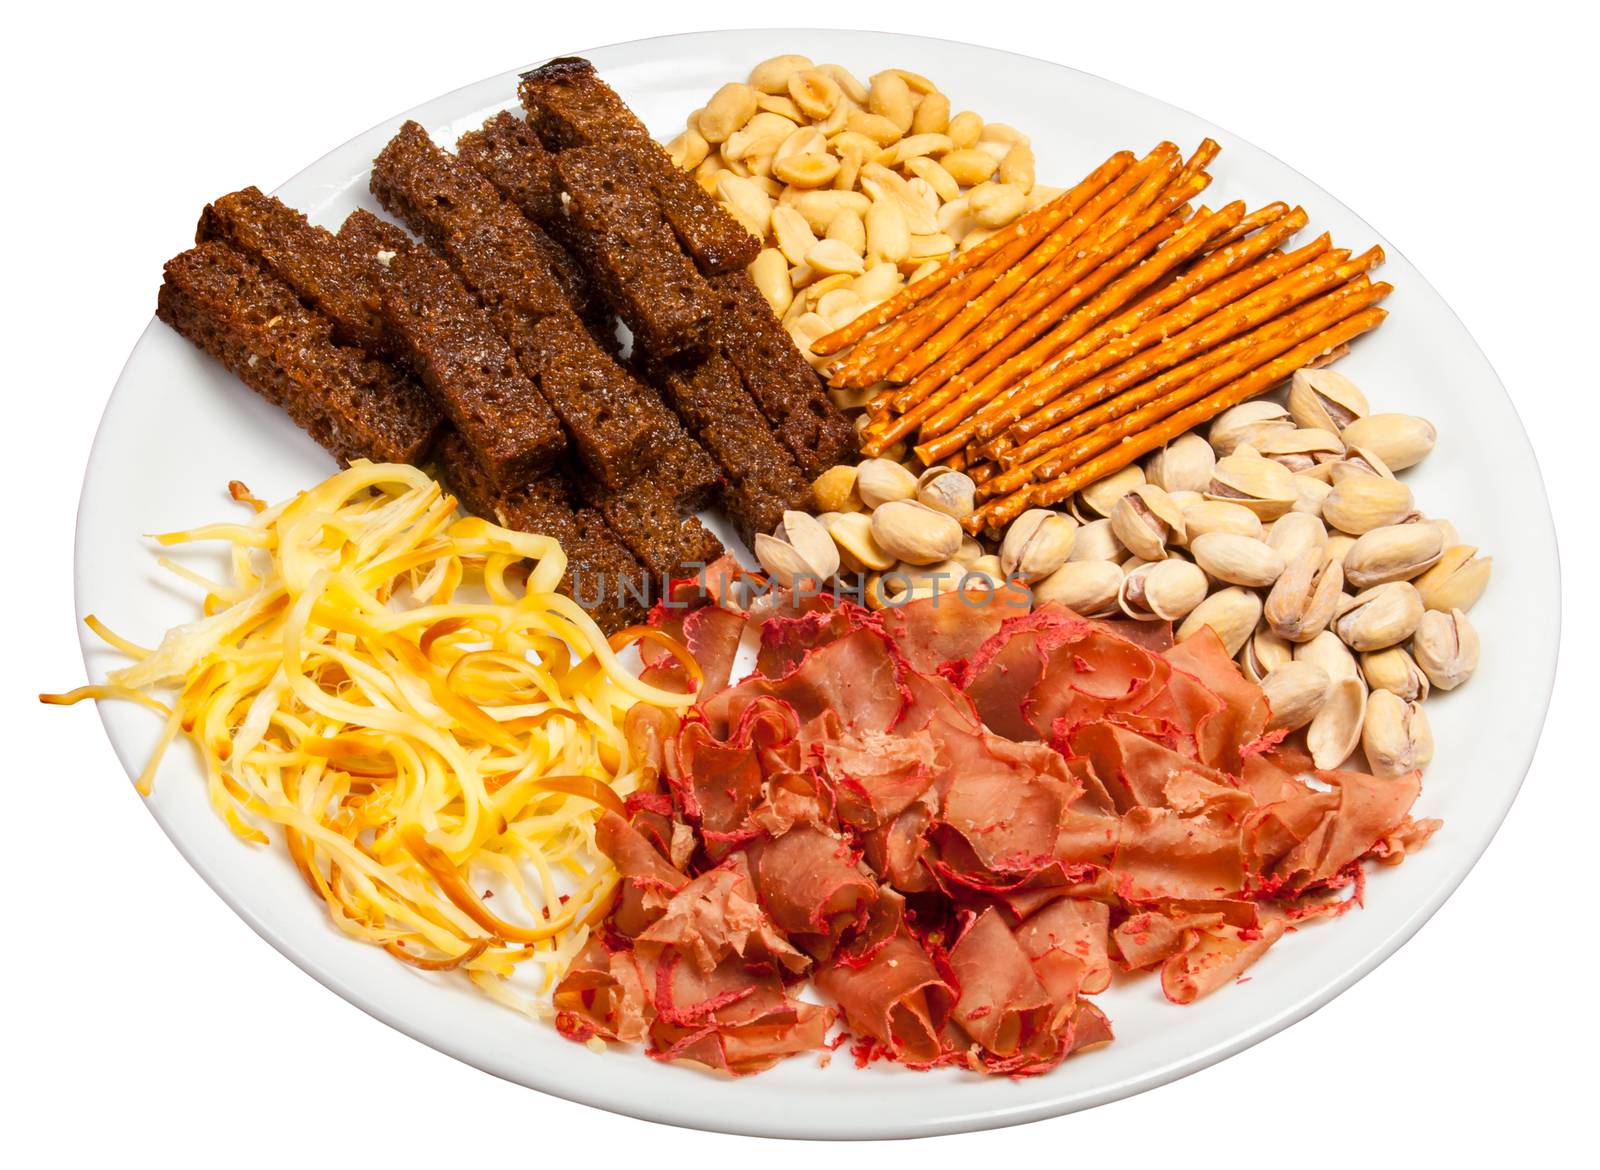 Plate full of crunchy, salty snacks, peanuts, pistachio nut cheese and meat